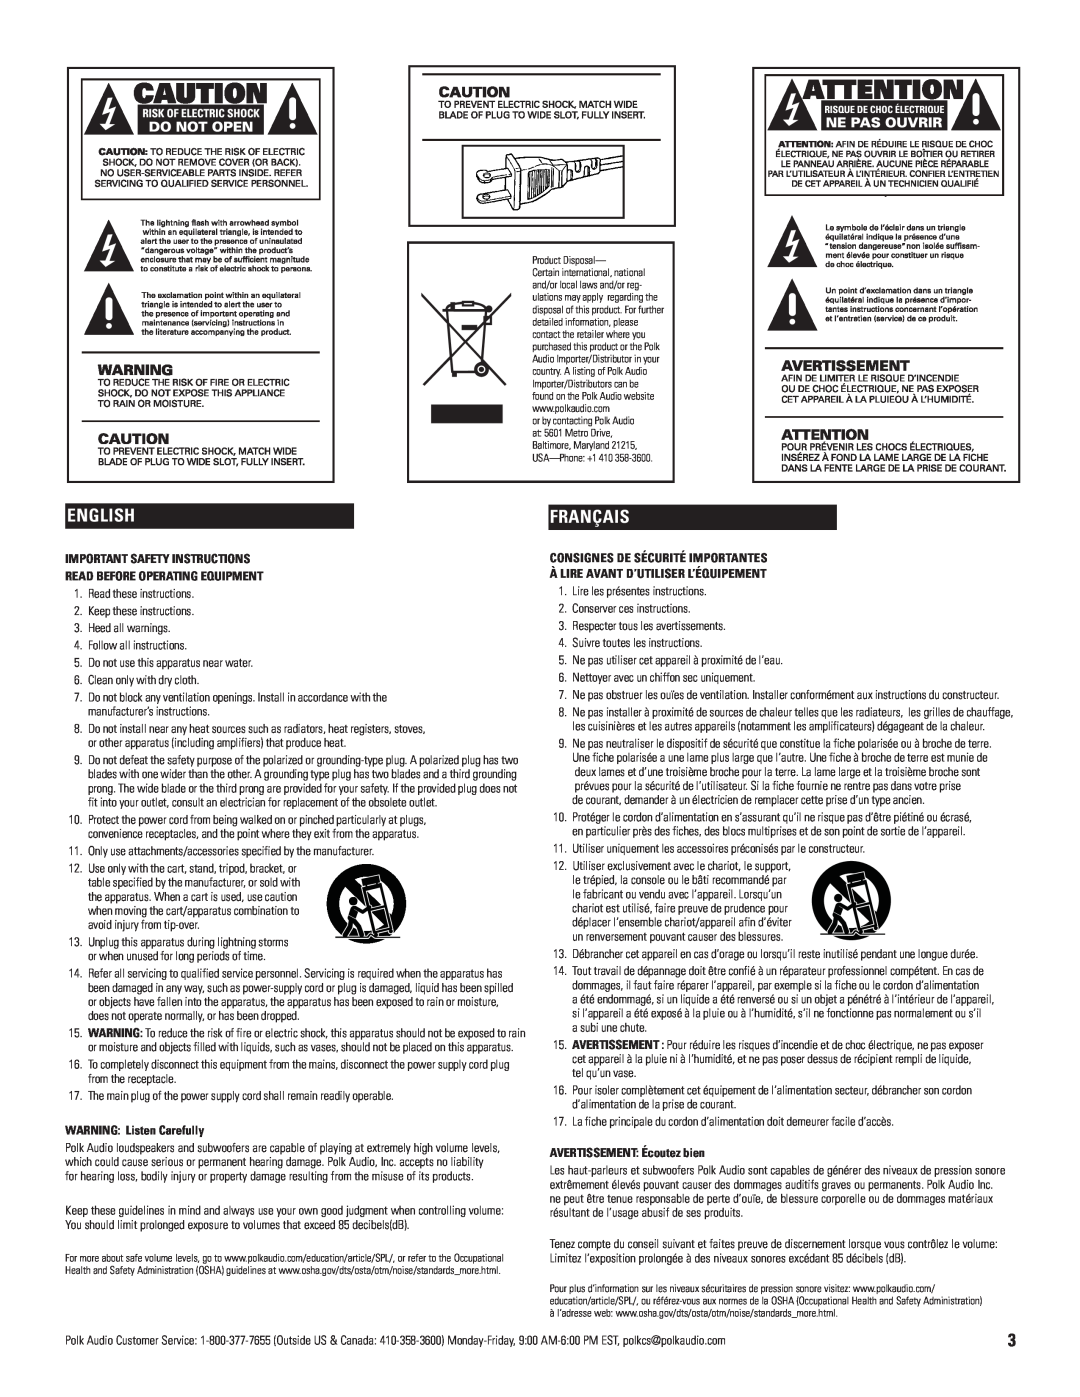 Polk Audio AM9975-C4 owner manual Français, English, Important Safety Instructions, Read Before Operating Equipment 